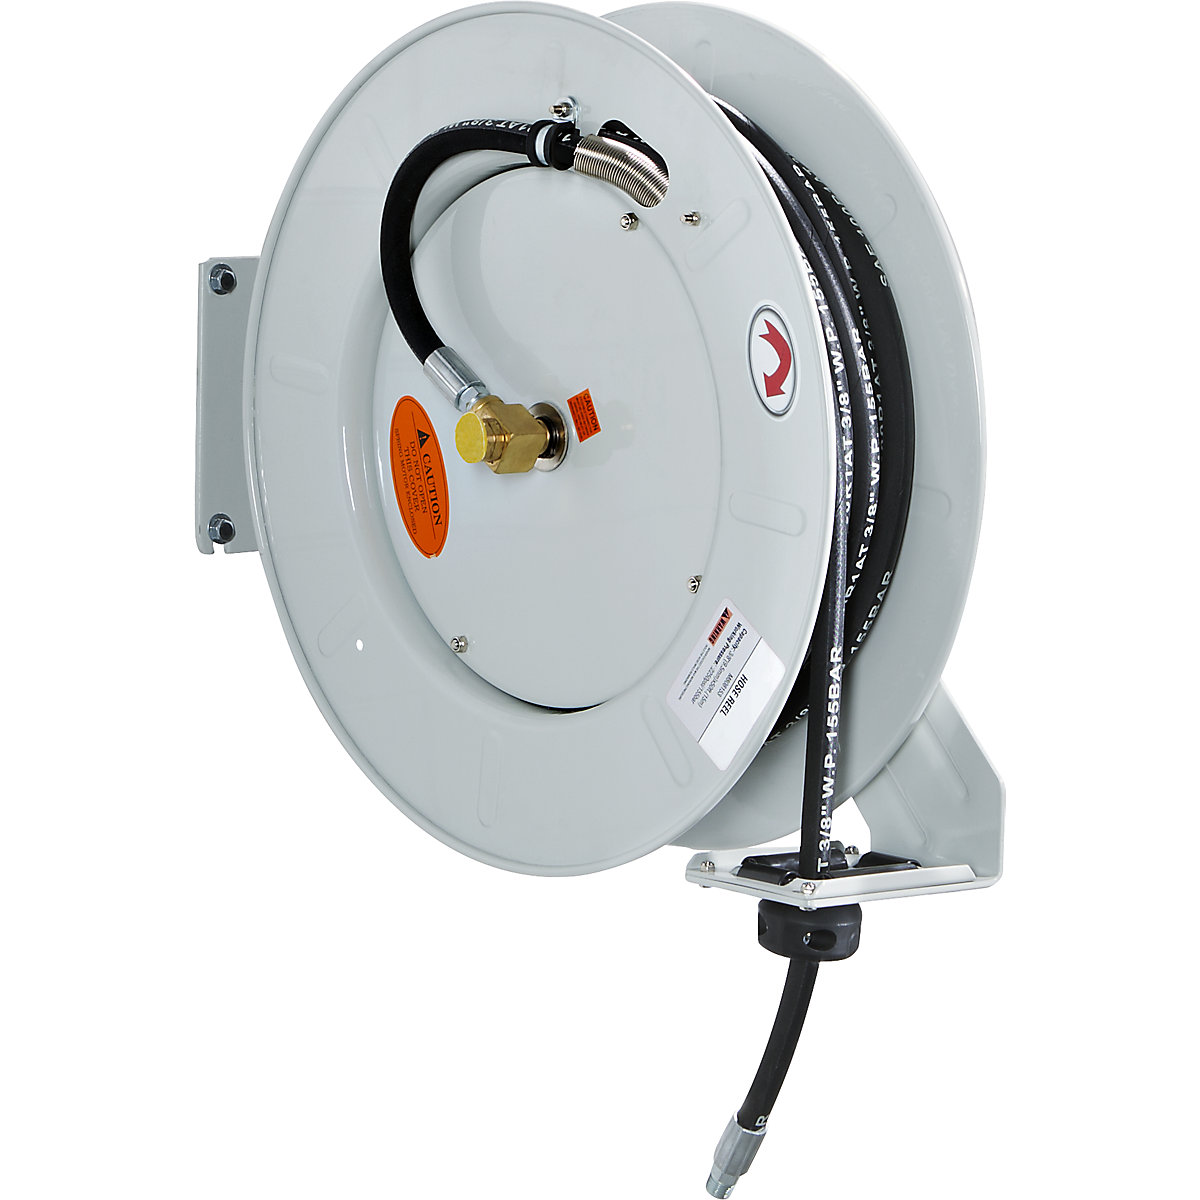 Hose & Cord Reels  Keep Hoses & Cords Organized With Retractable